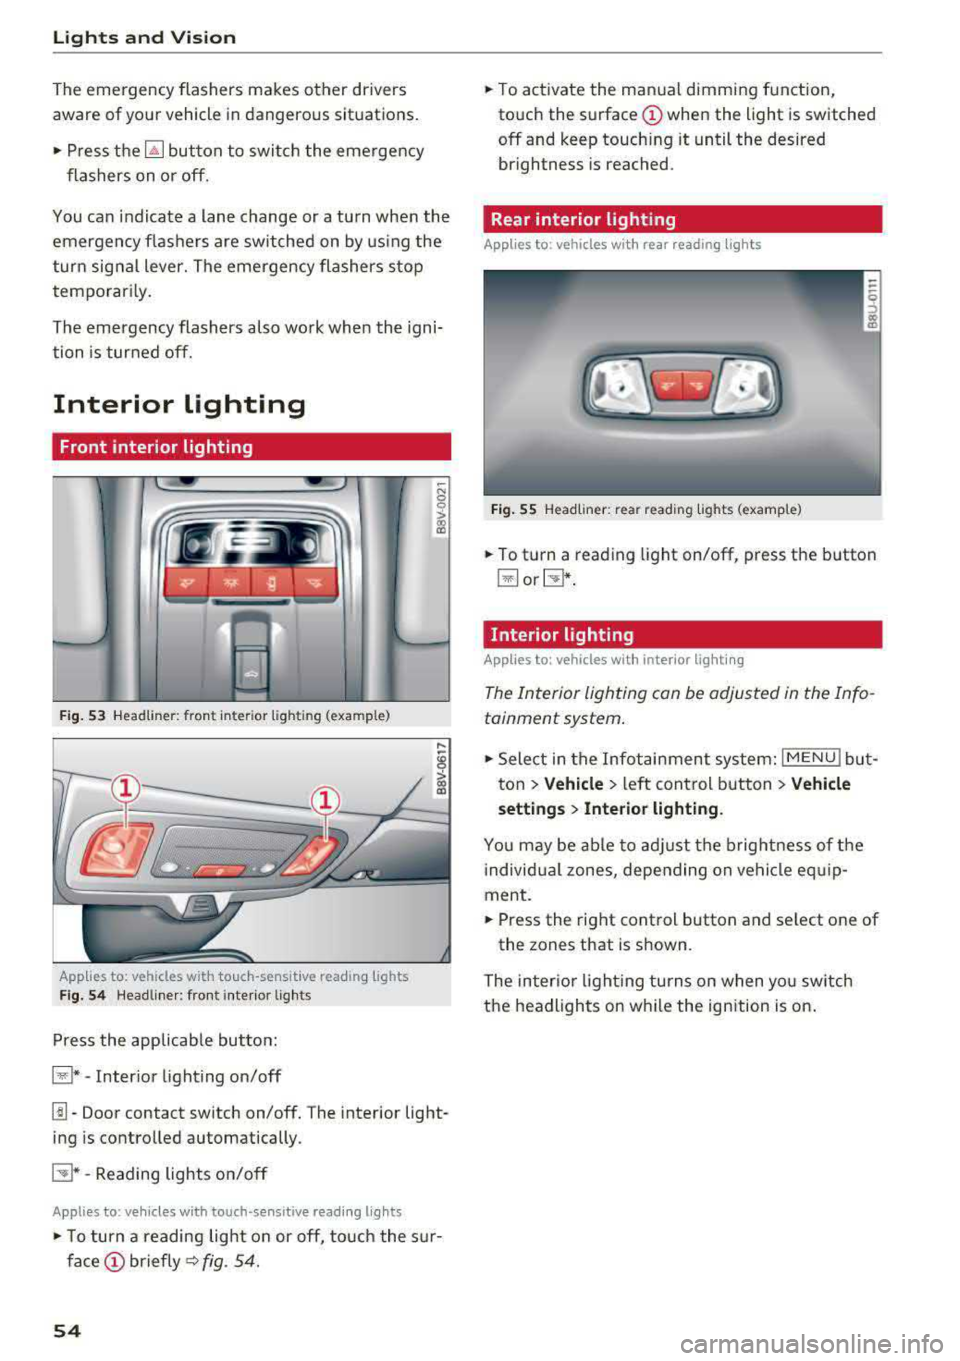 AUDI A3 SEDAN 2017 Workshop Manual Lights and  Vision 
The emergency  flashers  makes  other  drivers  
aware  of your  veh icle  in dangerous  situations. 
• P ress t h e ~ button  to  switch  the  eme rgency 
f lashers  on  o r off